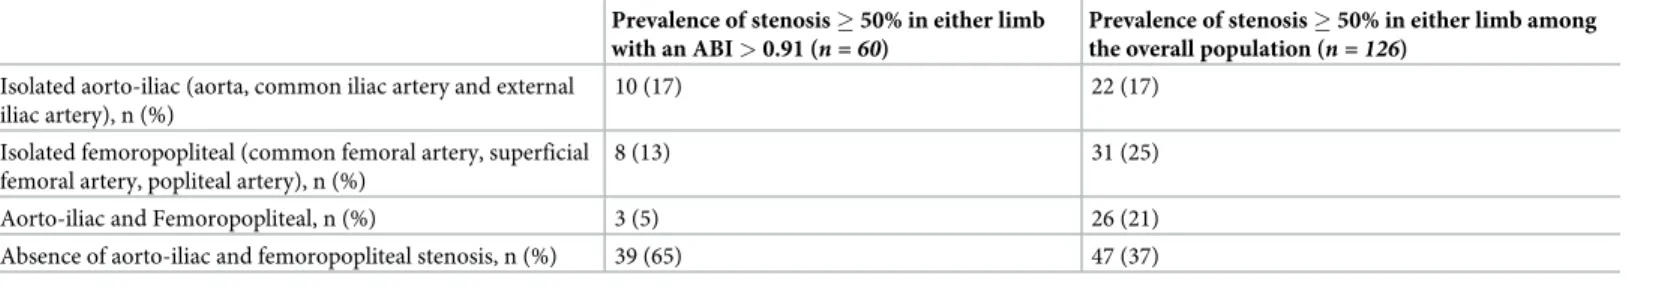 Table 2. Prevalence and anatomic level of stenosis � 50% in either limb.